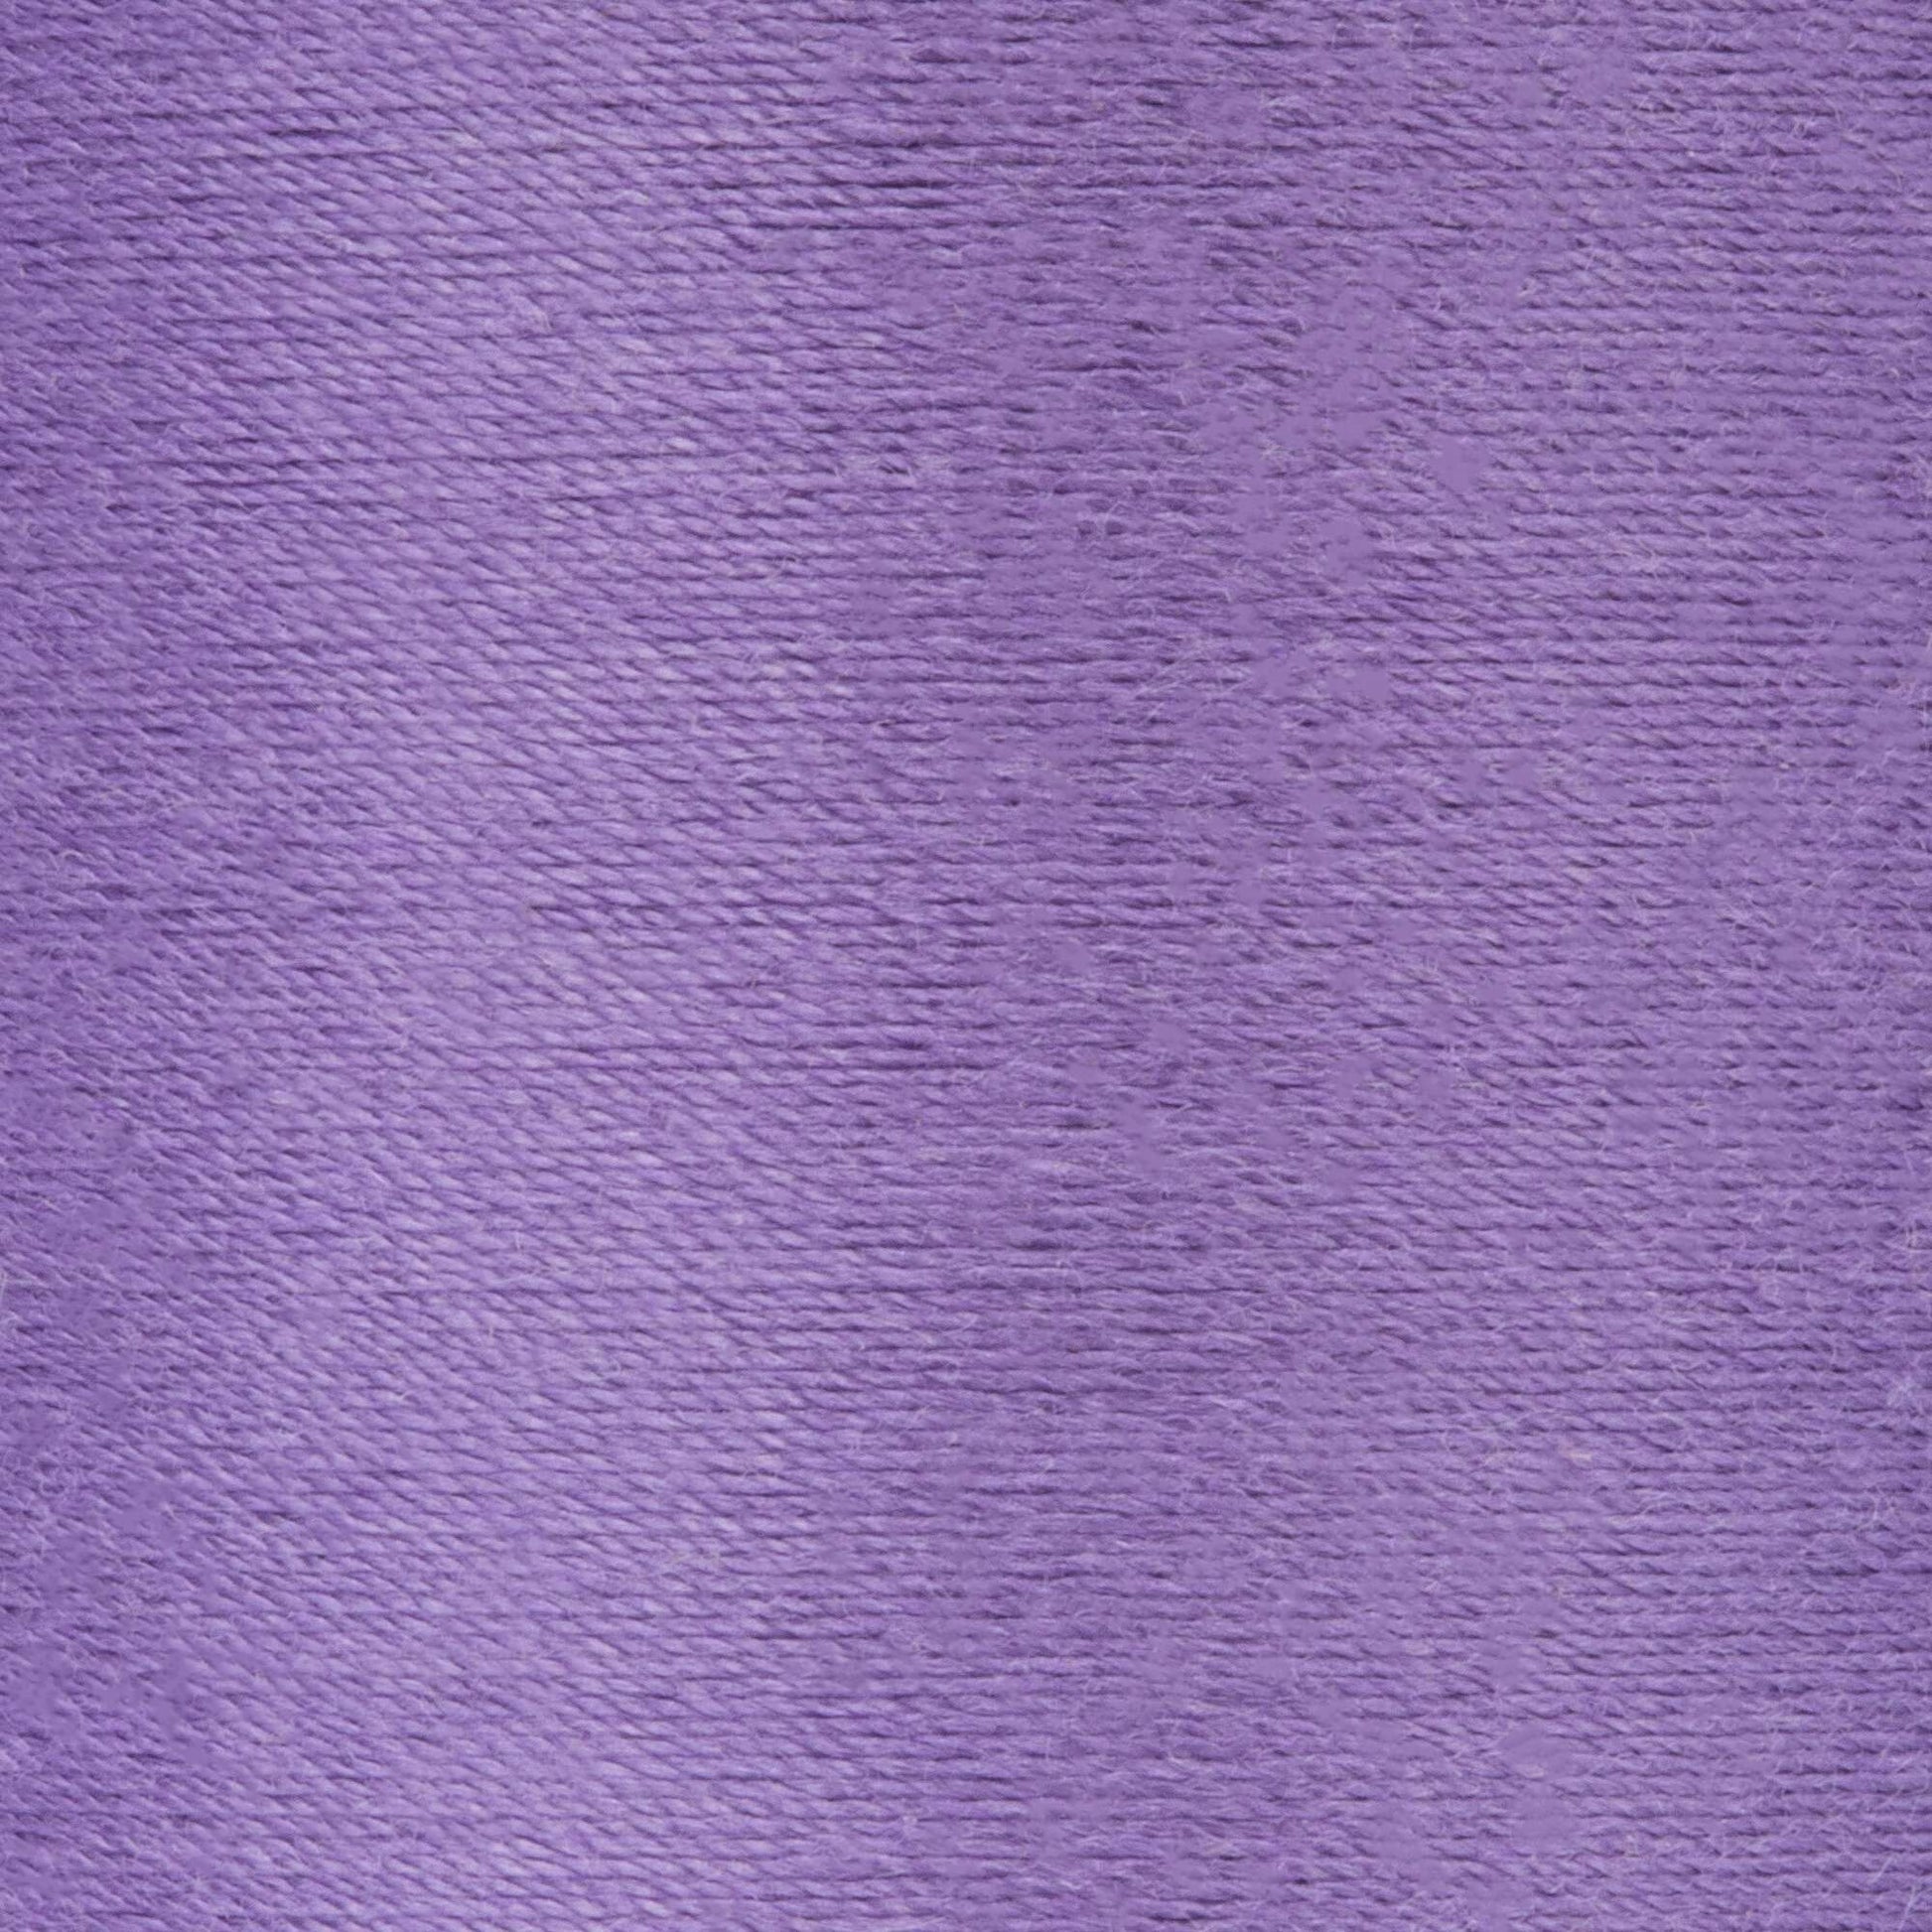 Coats & Clark Cotton Covered Quilting & Piecing Thread (500 Yards) Violet